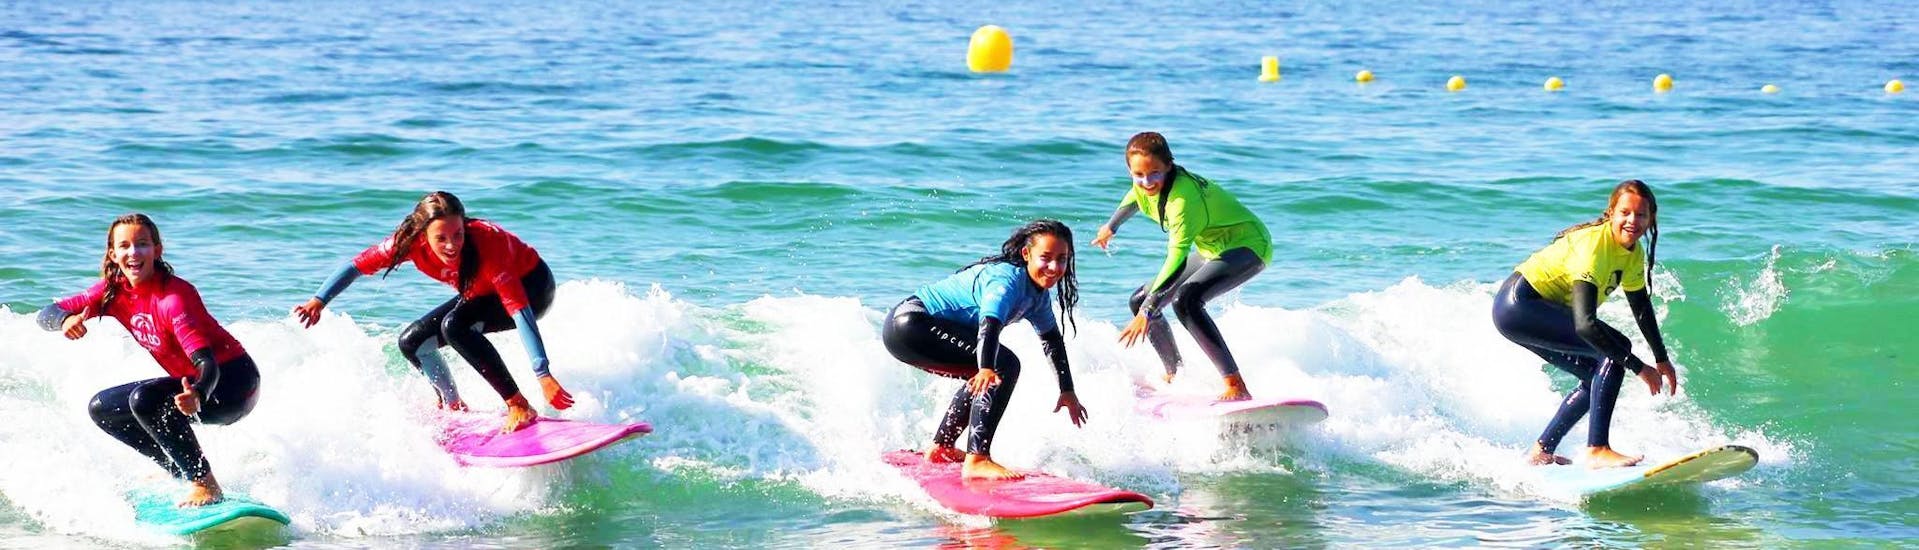 The participants have fun during their surf course on one of the most suitable beaches in the region, together with Prado Surf.